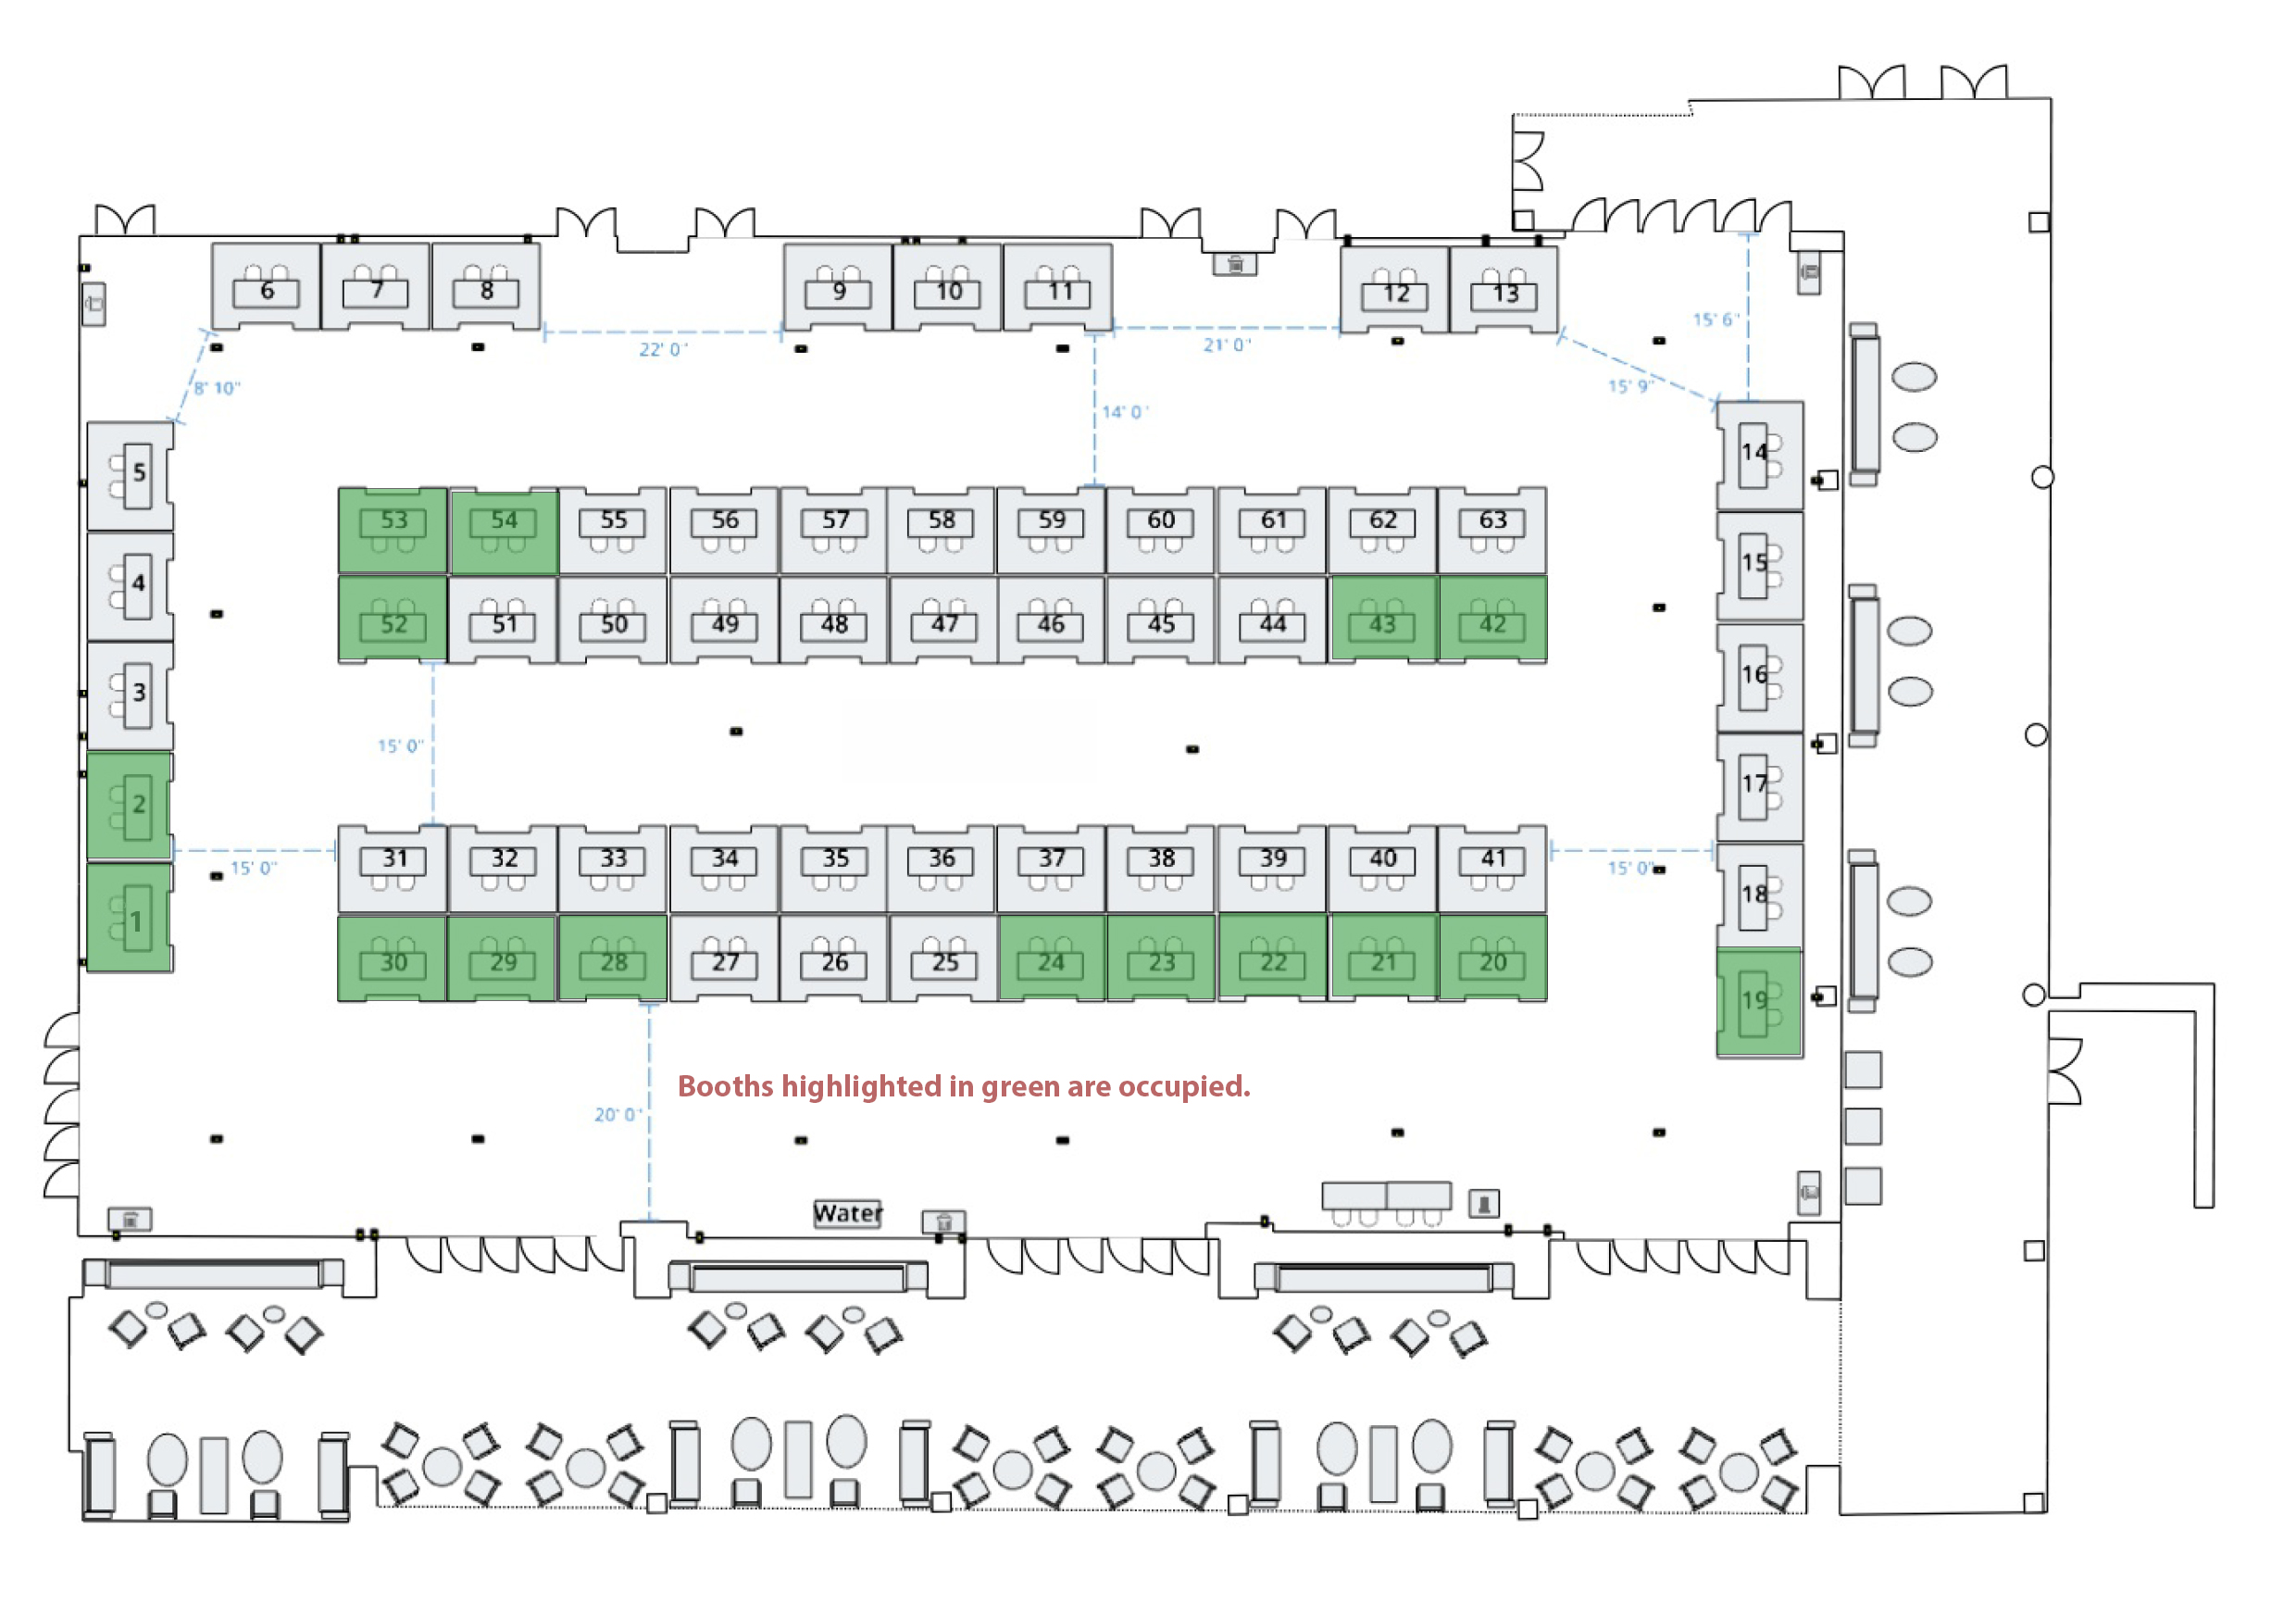 map of booths in convention hall